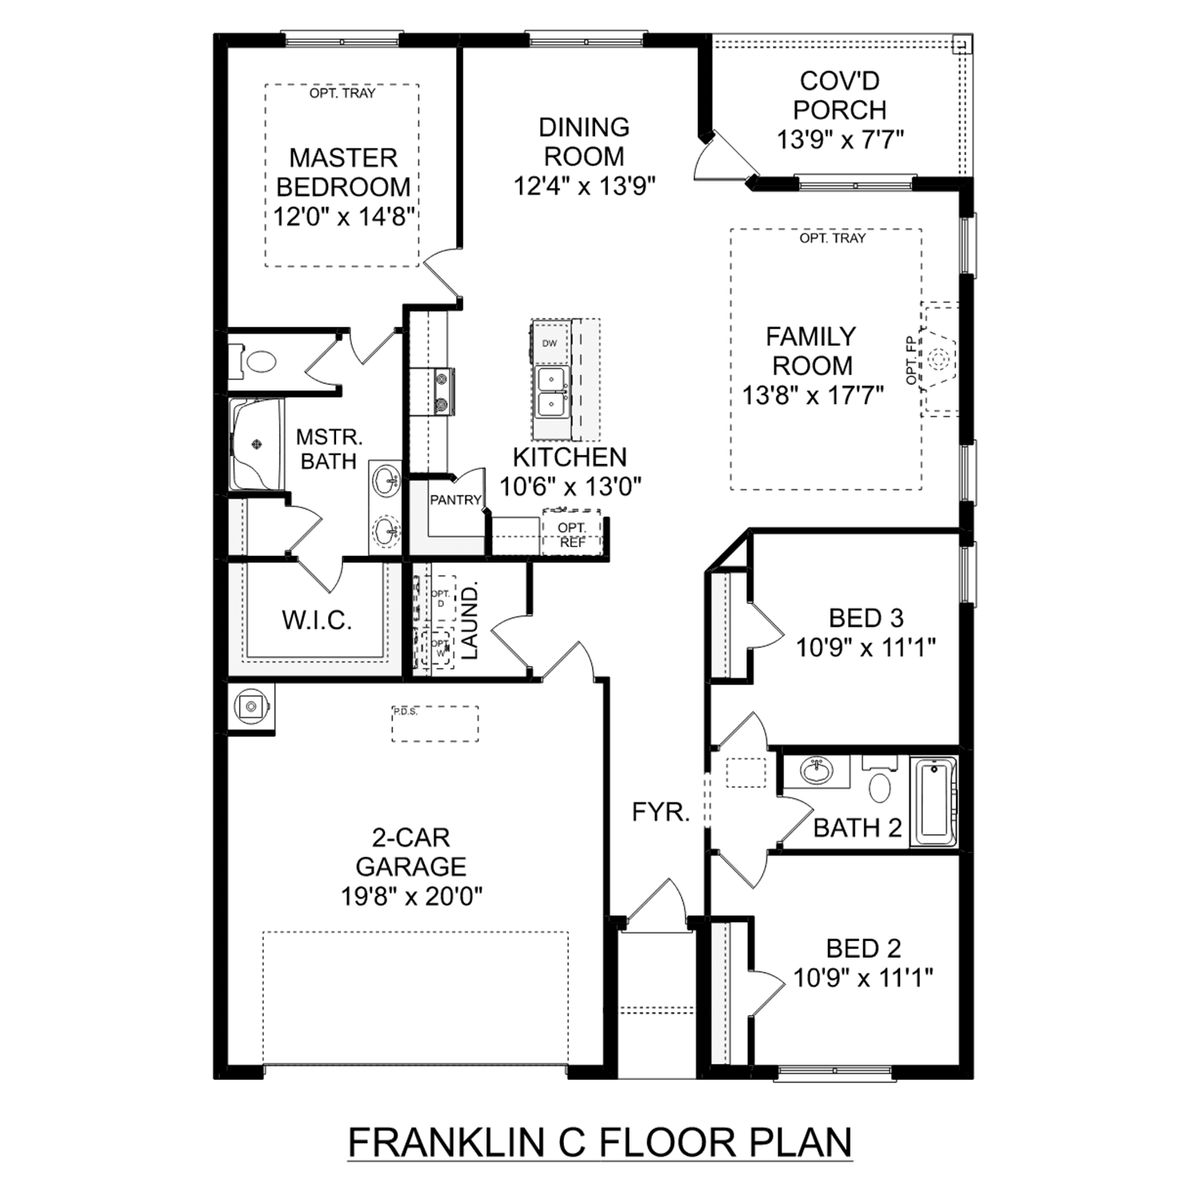 1 - The Franklin C floor plan layout for 141 Amelia Drive in Davidson Homes' Little Burwell Estates community.